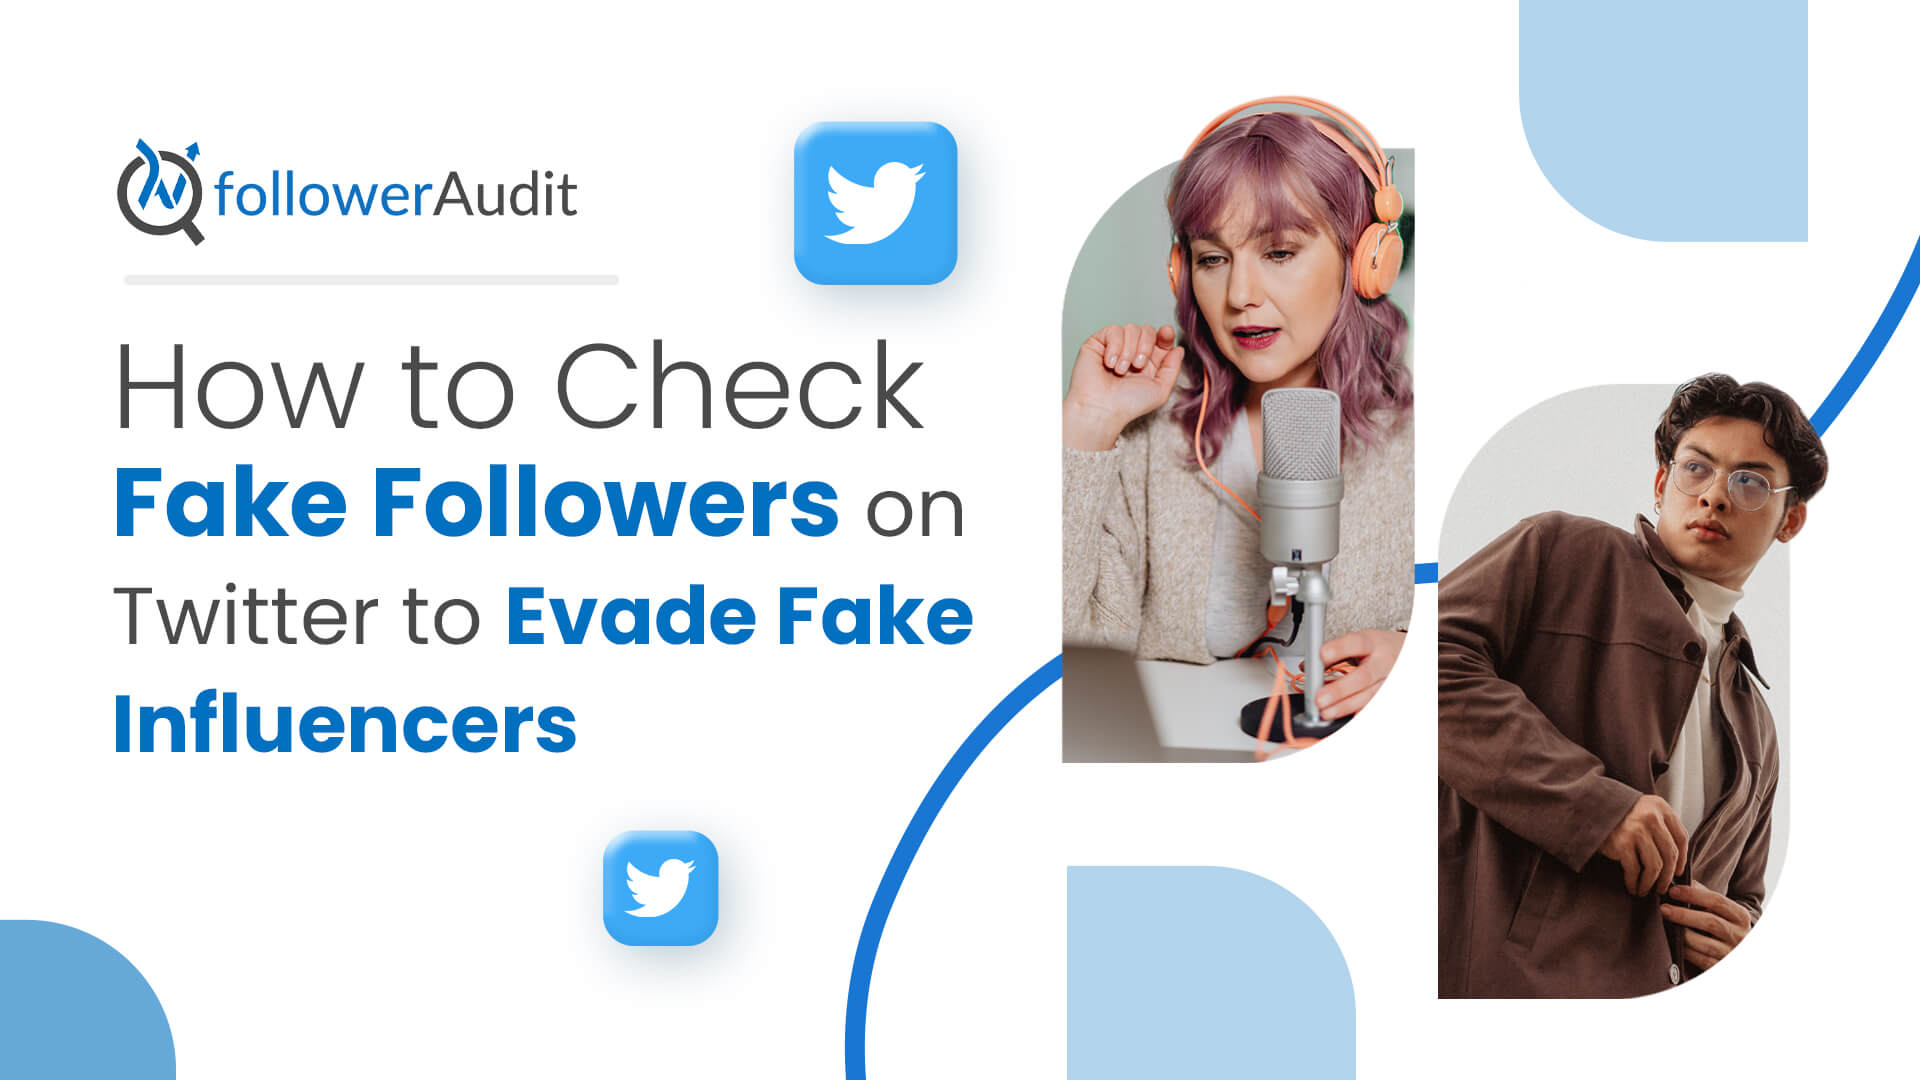 How to Check Fake Followers on Twitter to Evade Fake Influencers